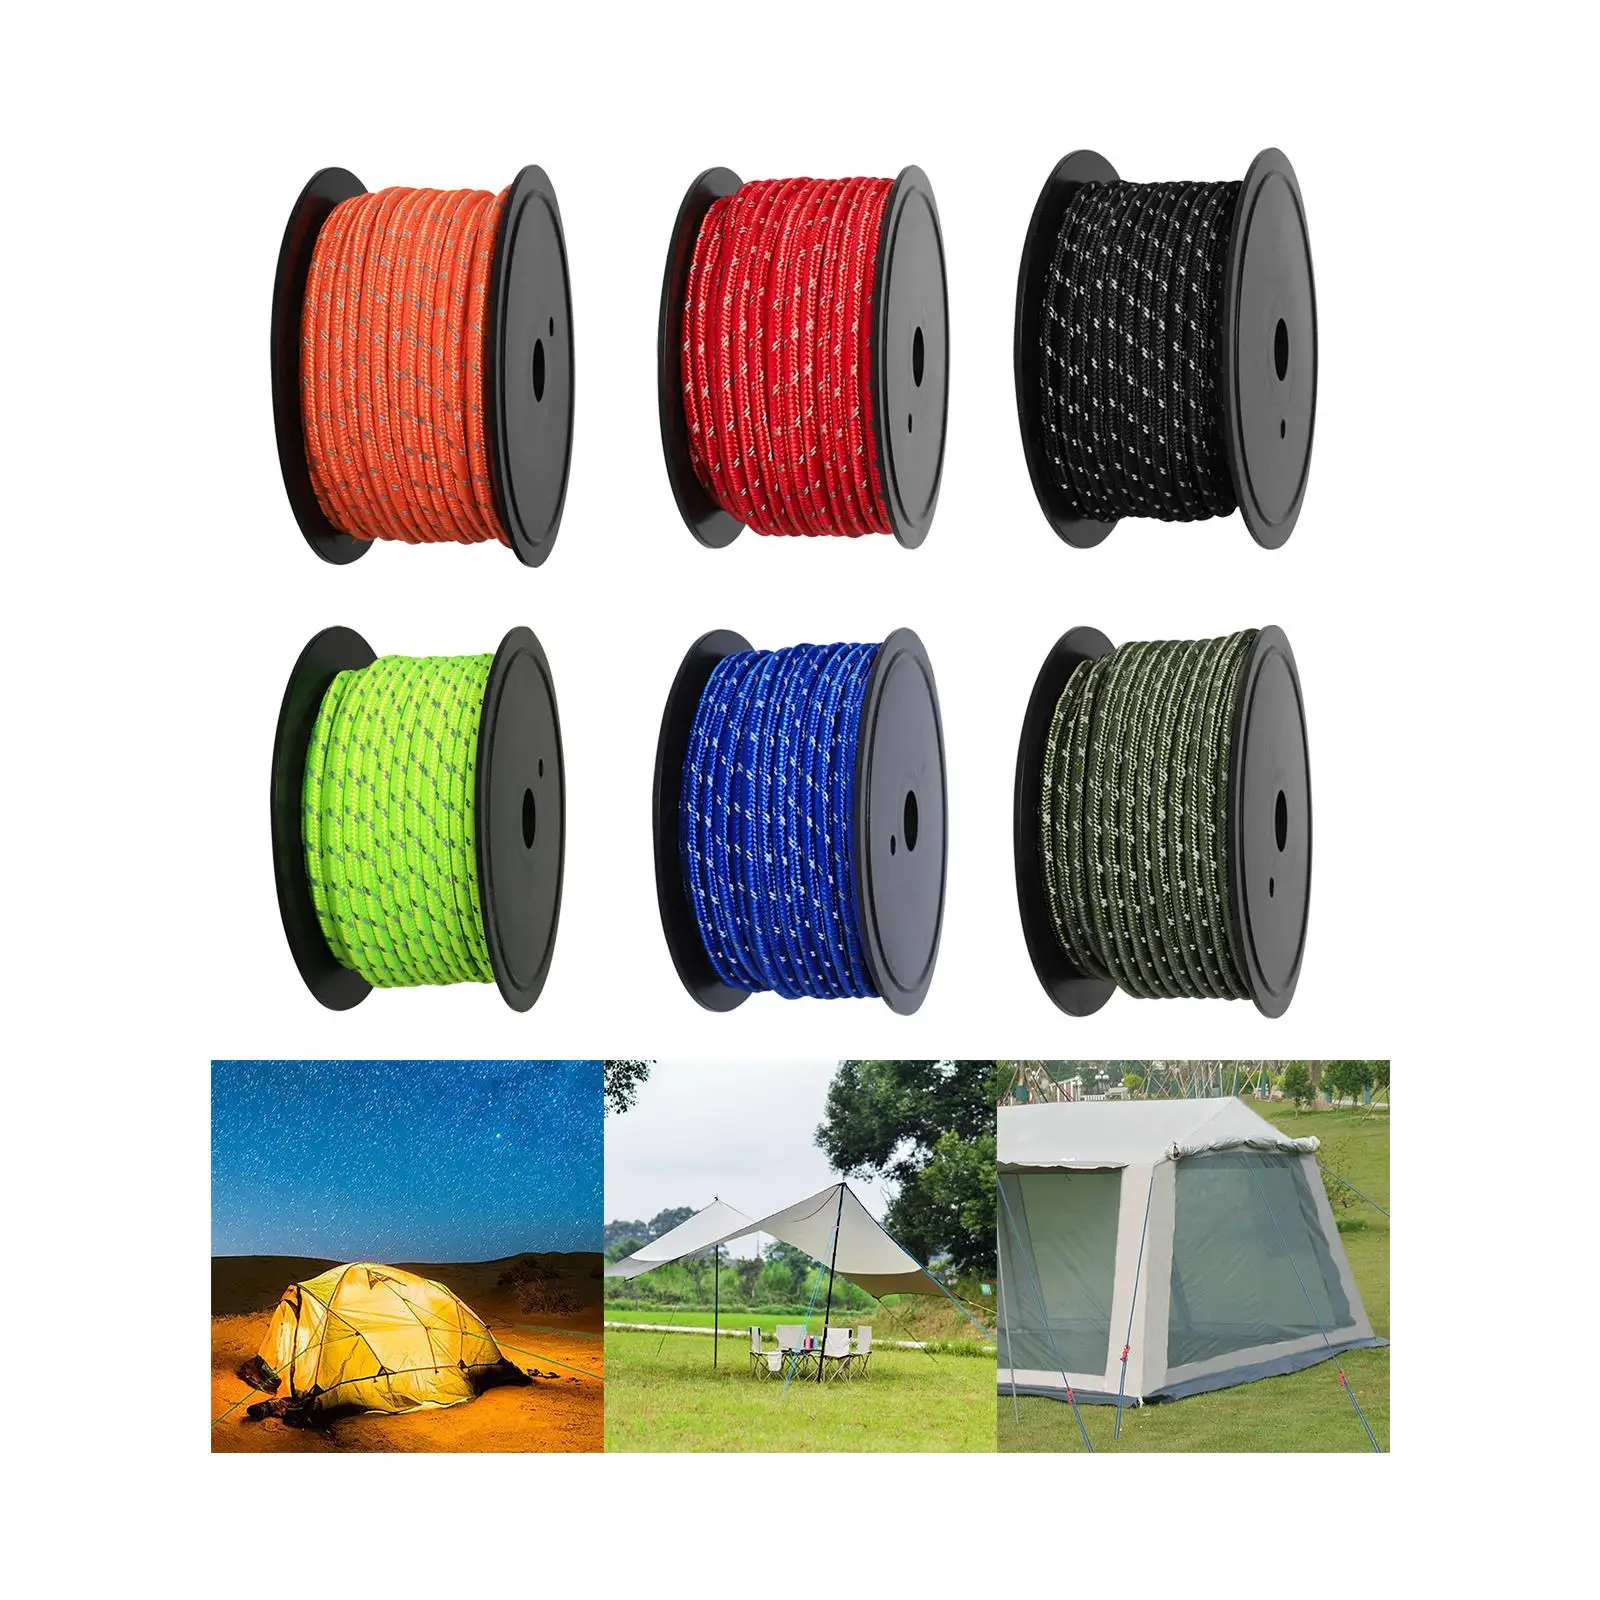 30M 6mm Reflective Tent Rope Guylines Glow in The Dark Tent Awning Guide Rope for Backpacking and Water Activities Multifunction